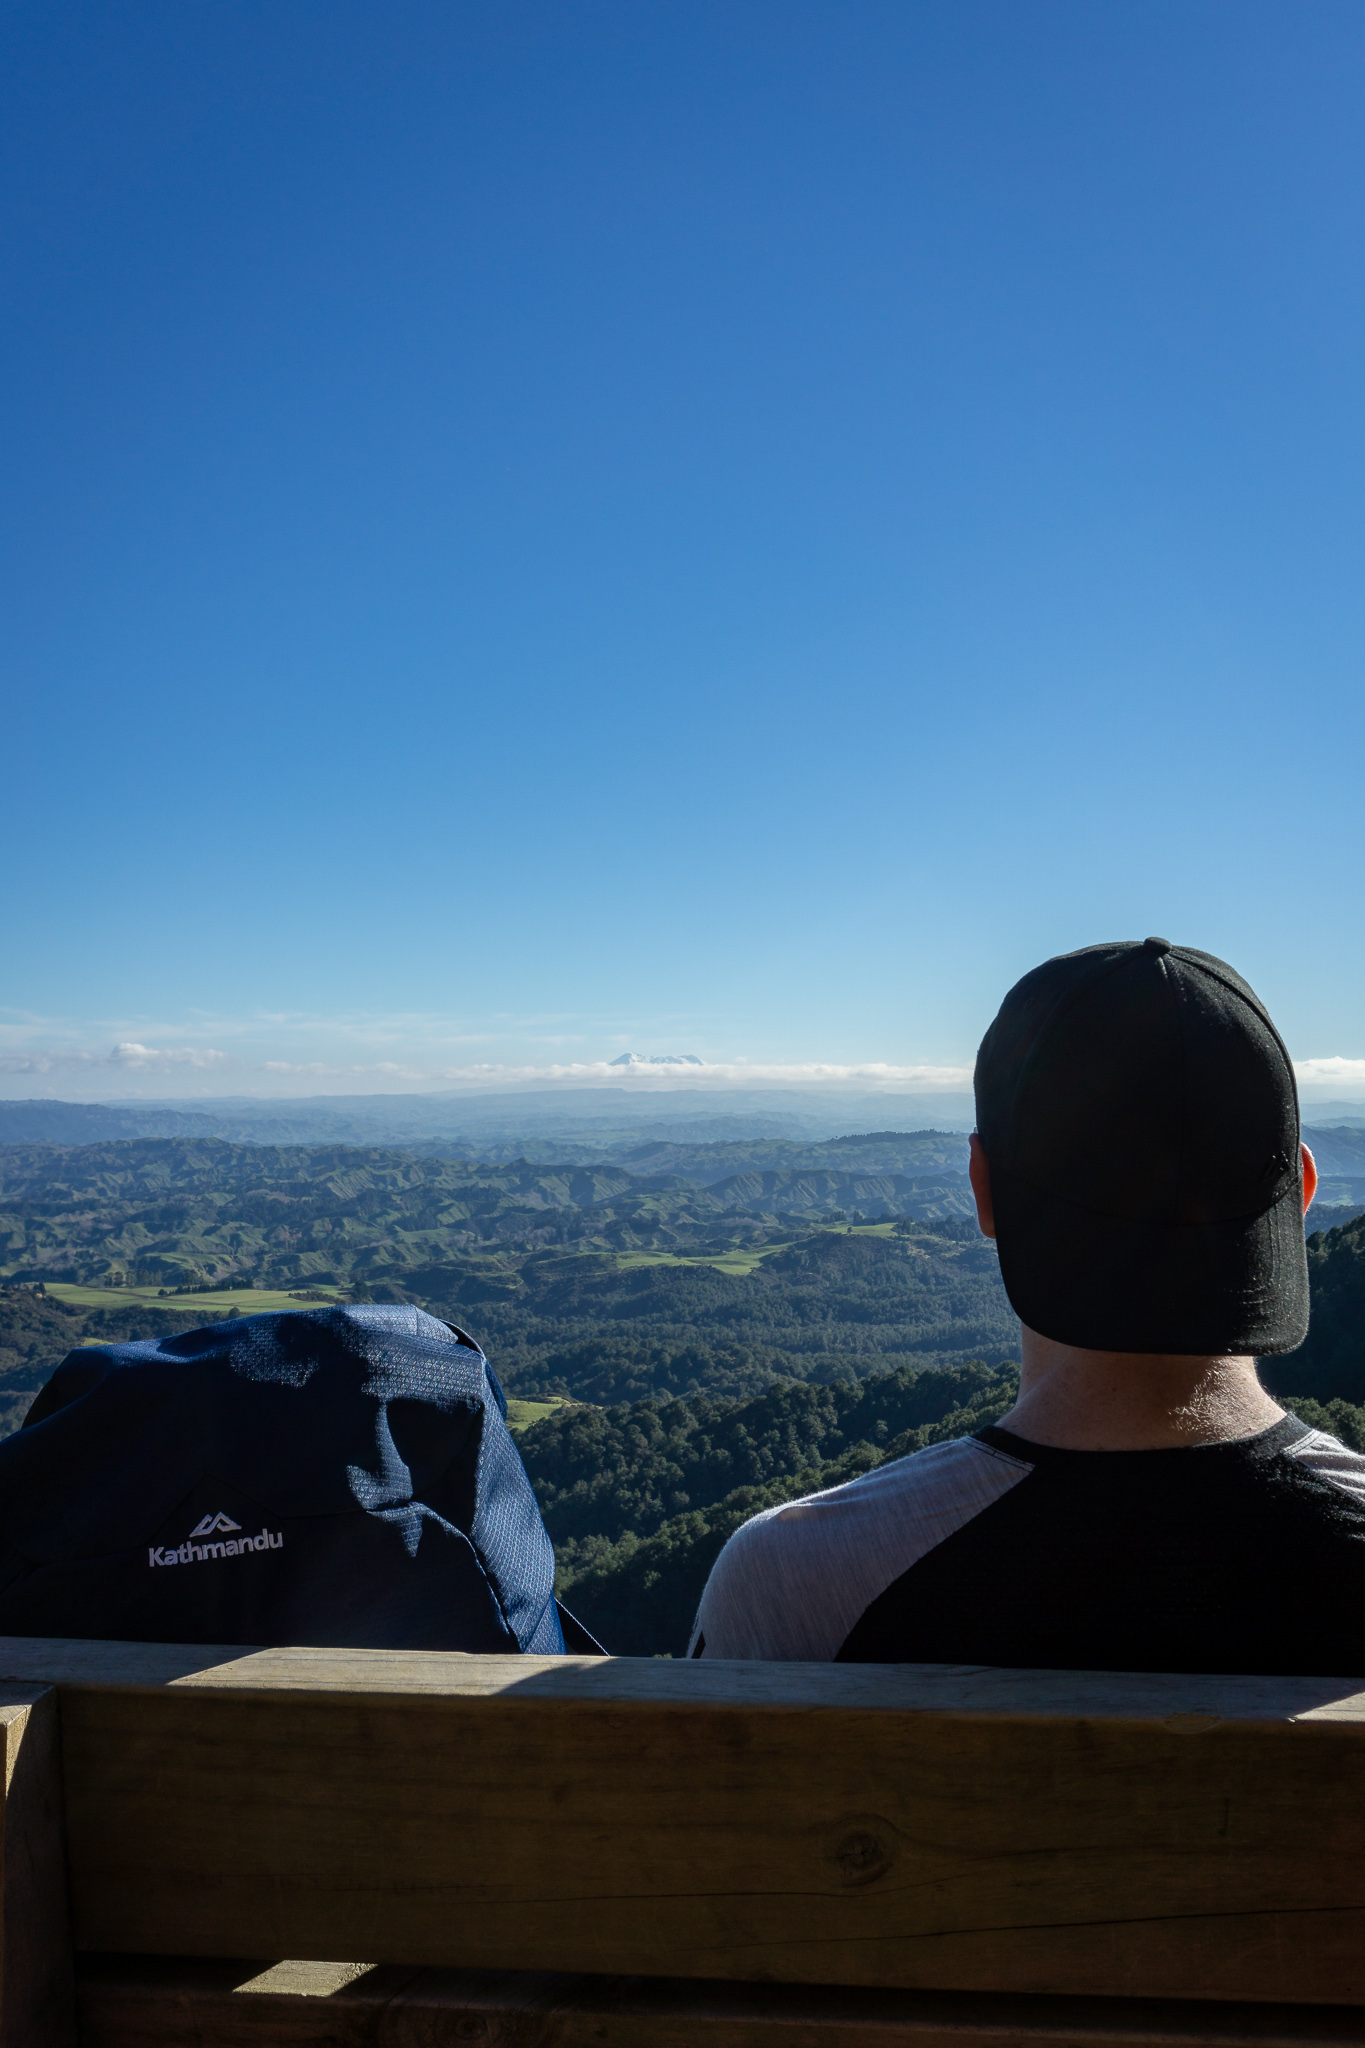 Close-up shot of a hiker wearing a cap sitting on a bench next to his Kathmandu pack with views over forest, rolling hills and Mt Ruapehu in the distance